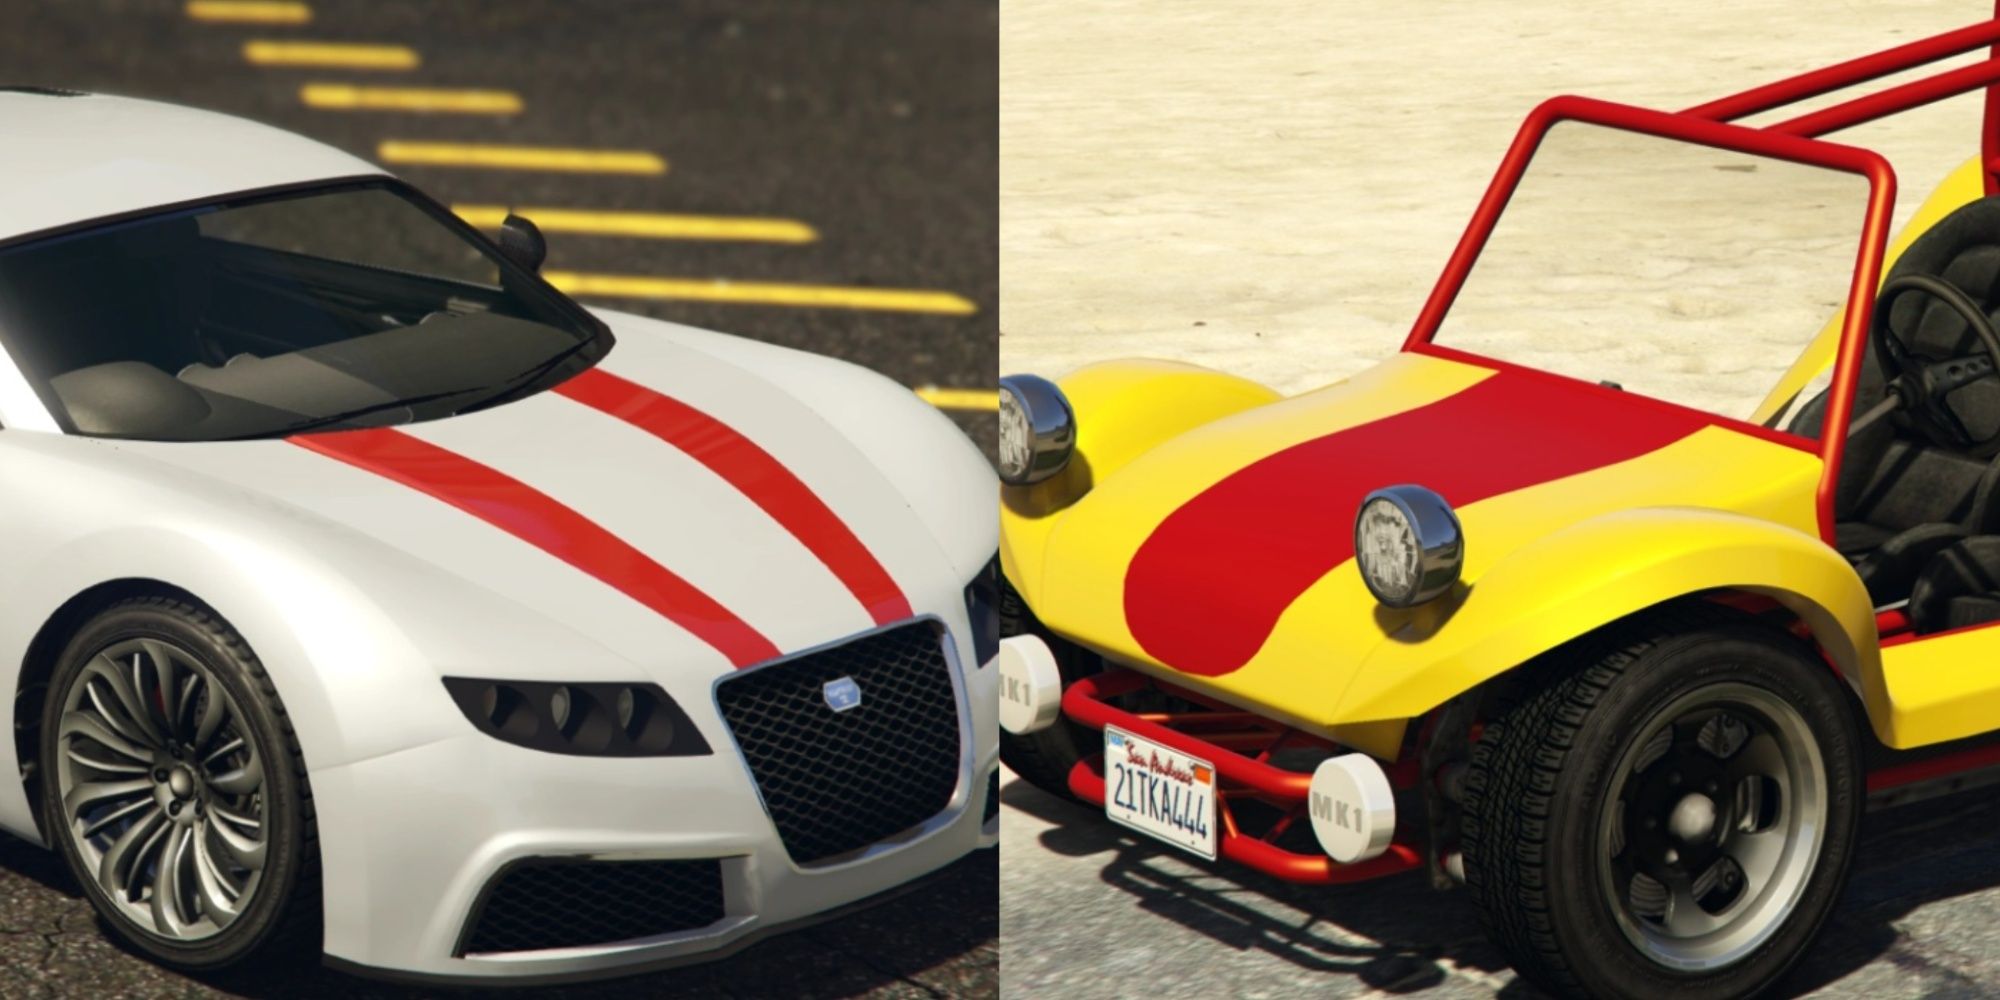 GTA 5 Adder and Bifta parked facing each other seperate images